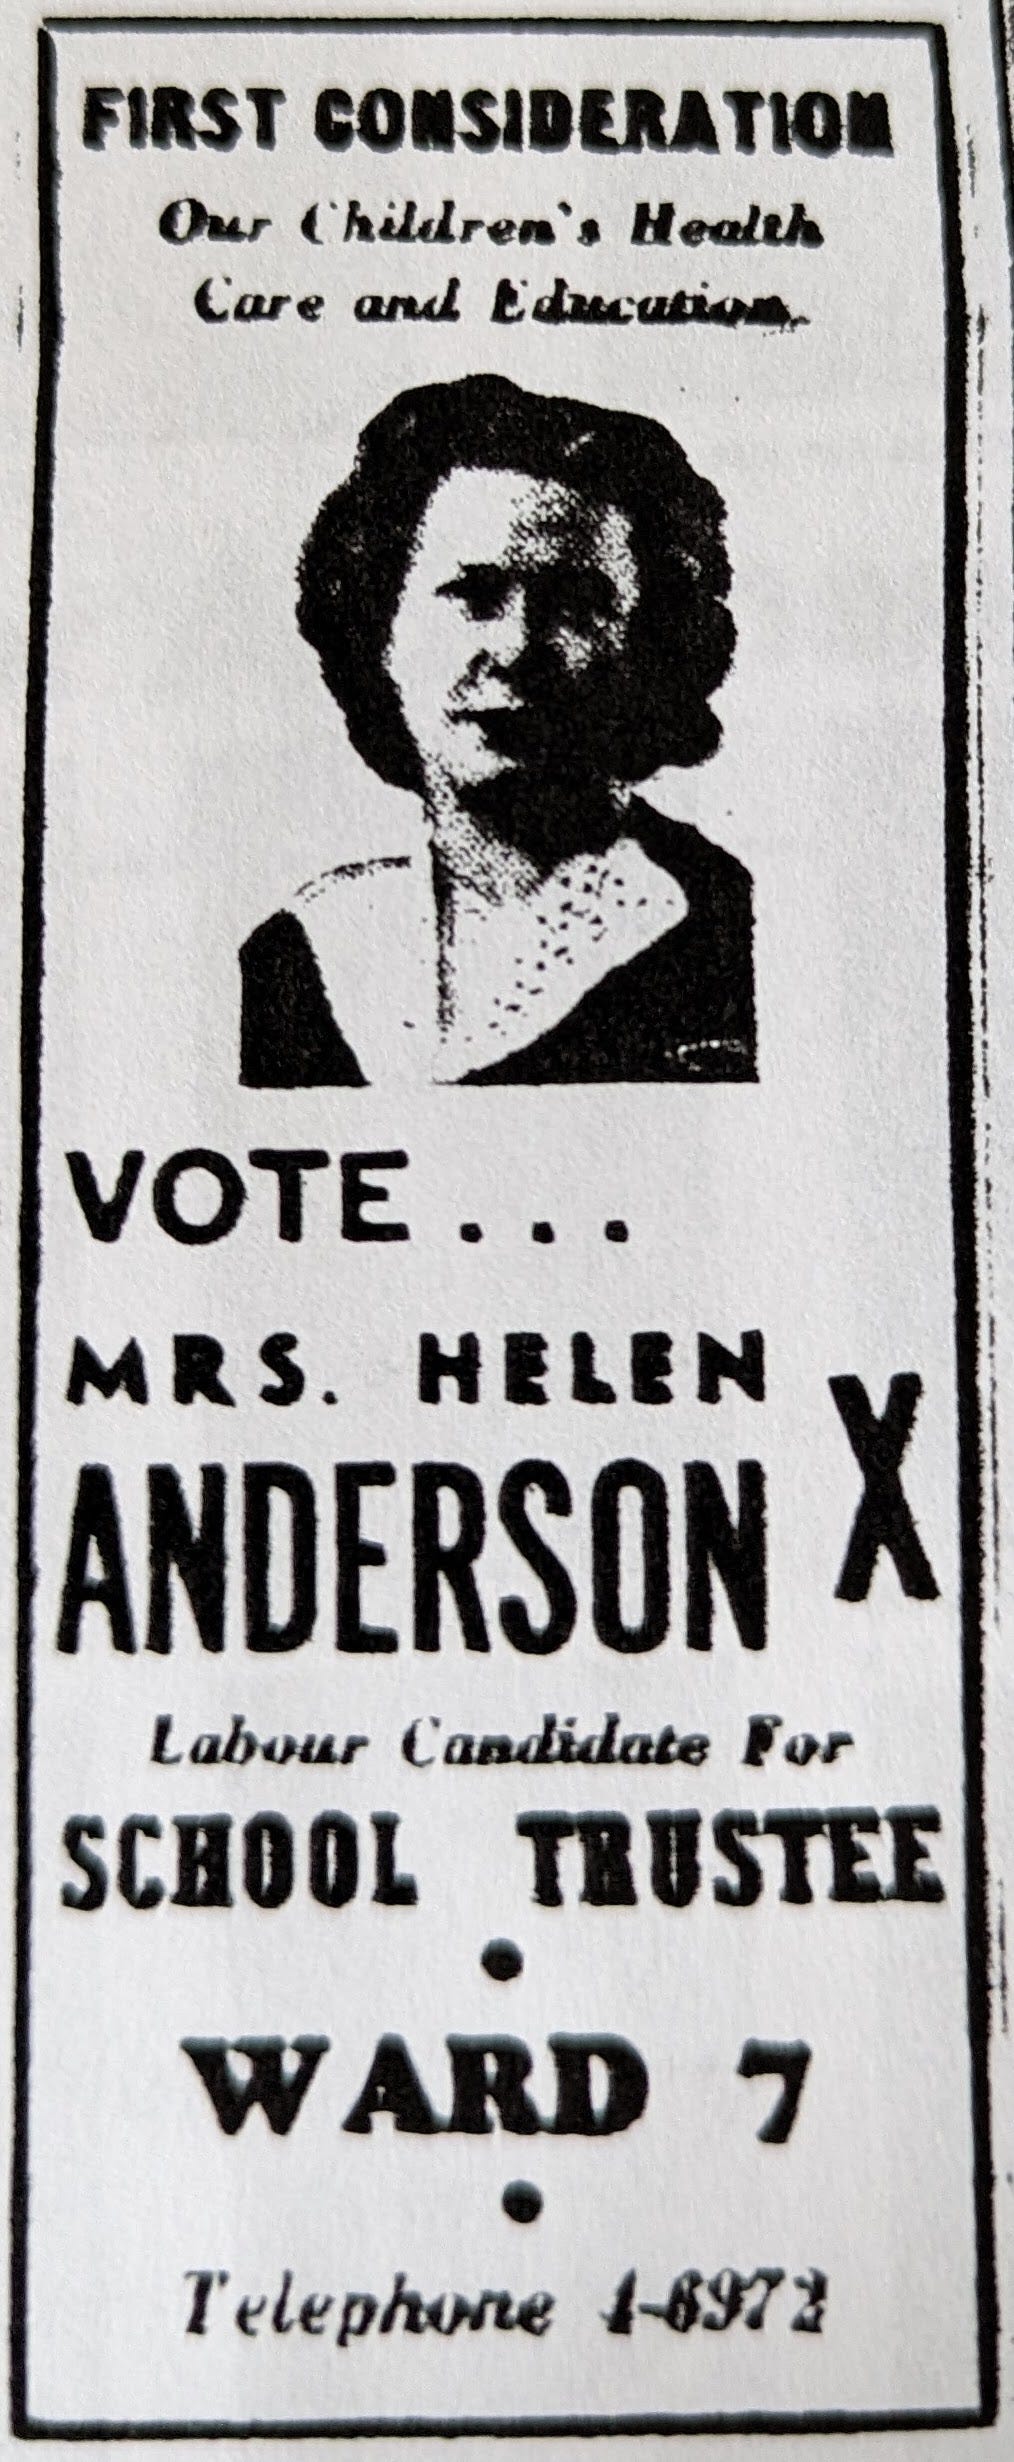 A campaign ad for Helen Anderson featuring a black and white photo of the candidate with the words "First Consideration: Our Children's Health Care and Education. Vote Mrs. Helen Anderson, Labour Candidate for School Trustee Ward 7."